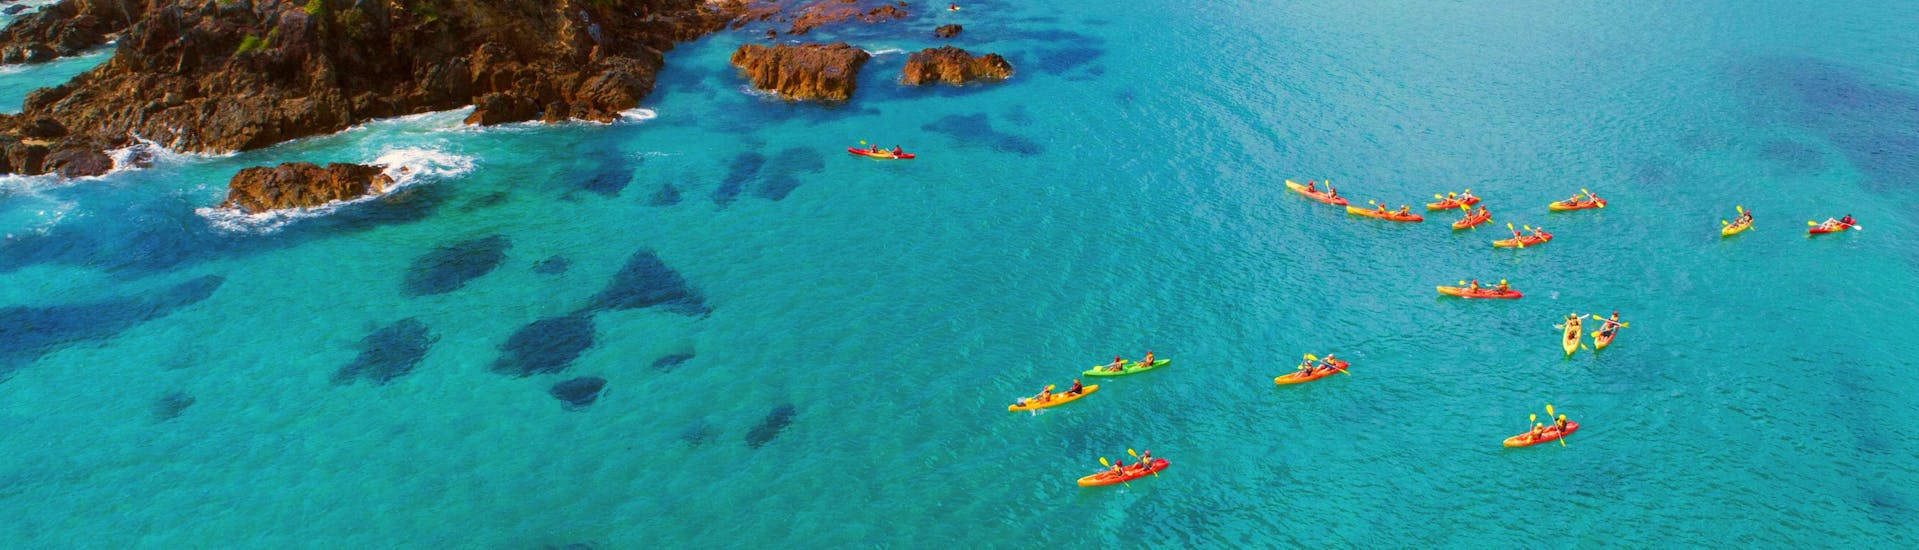 kayaking-with-dolphins-in-byron-bay-cape-byron-kayaking-hero